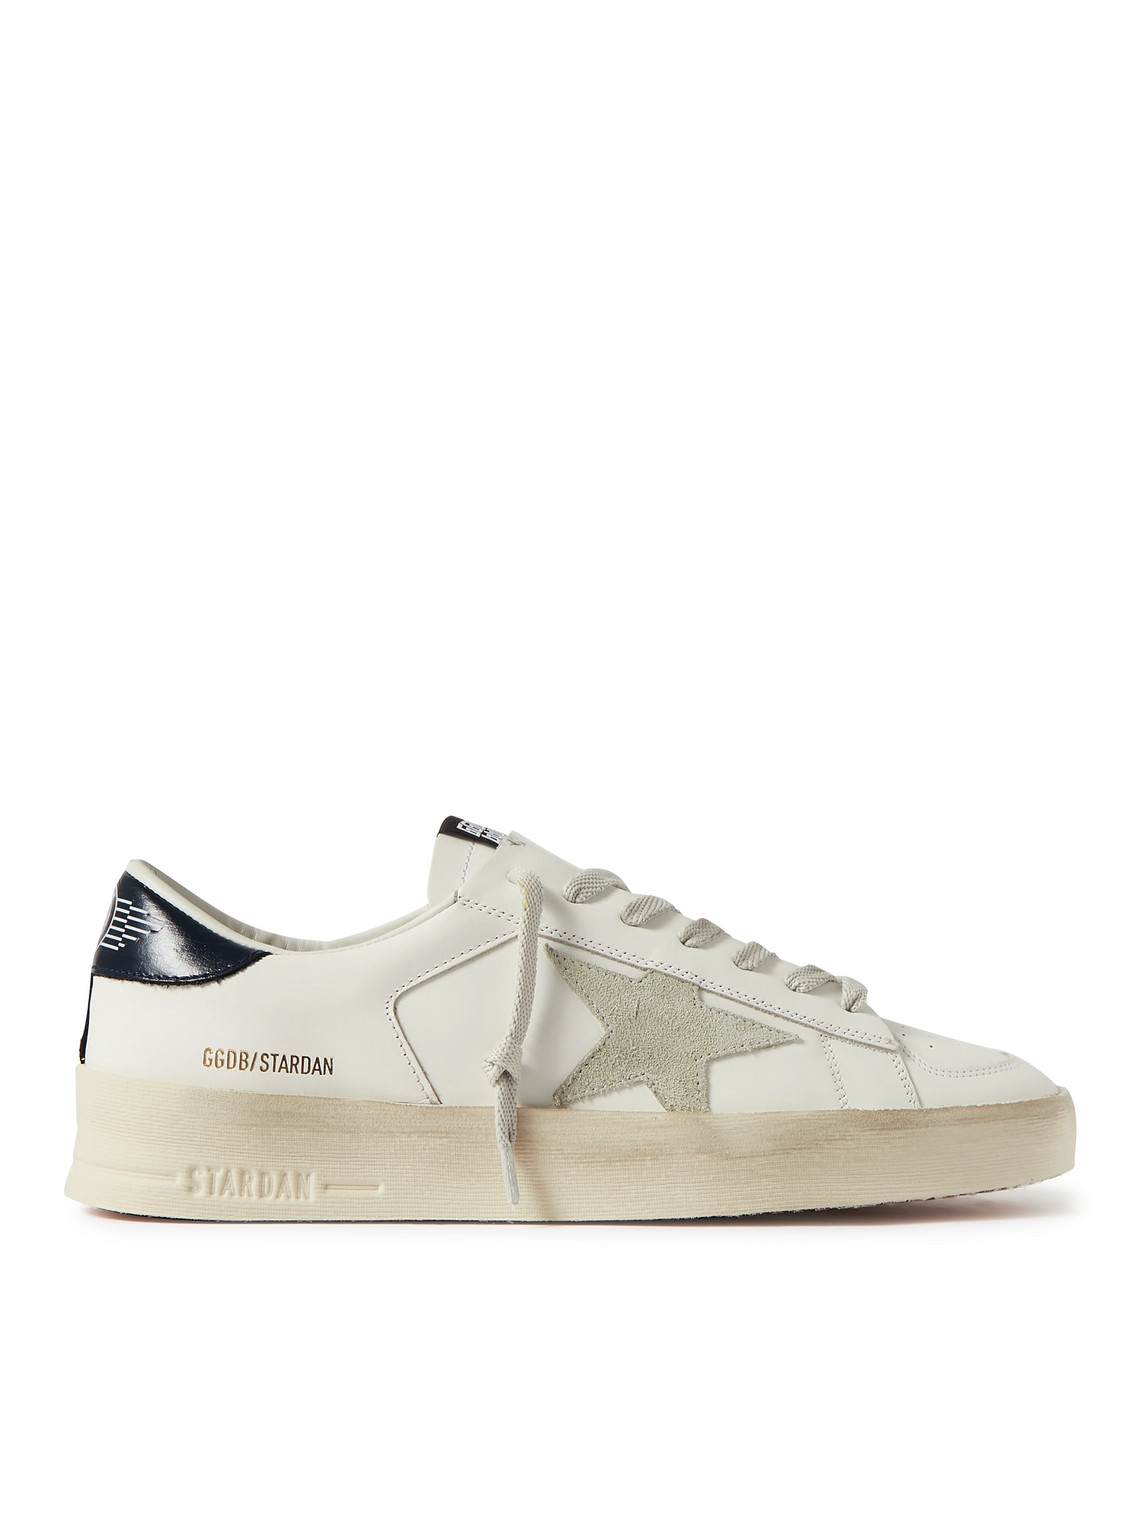 Stardan Suede-Trimmed Leather Sneakers